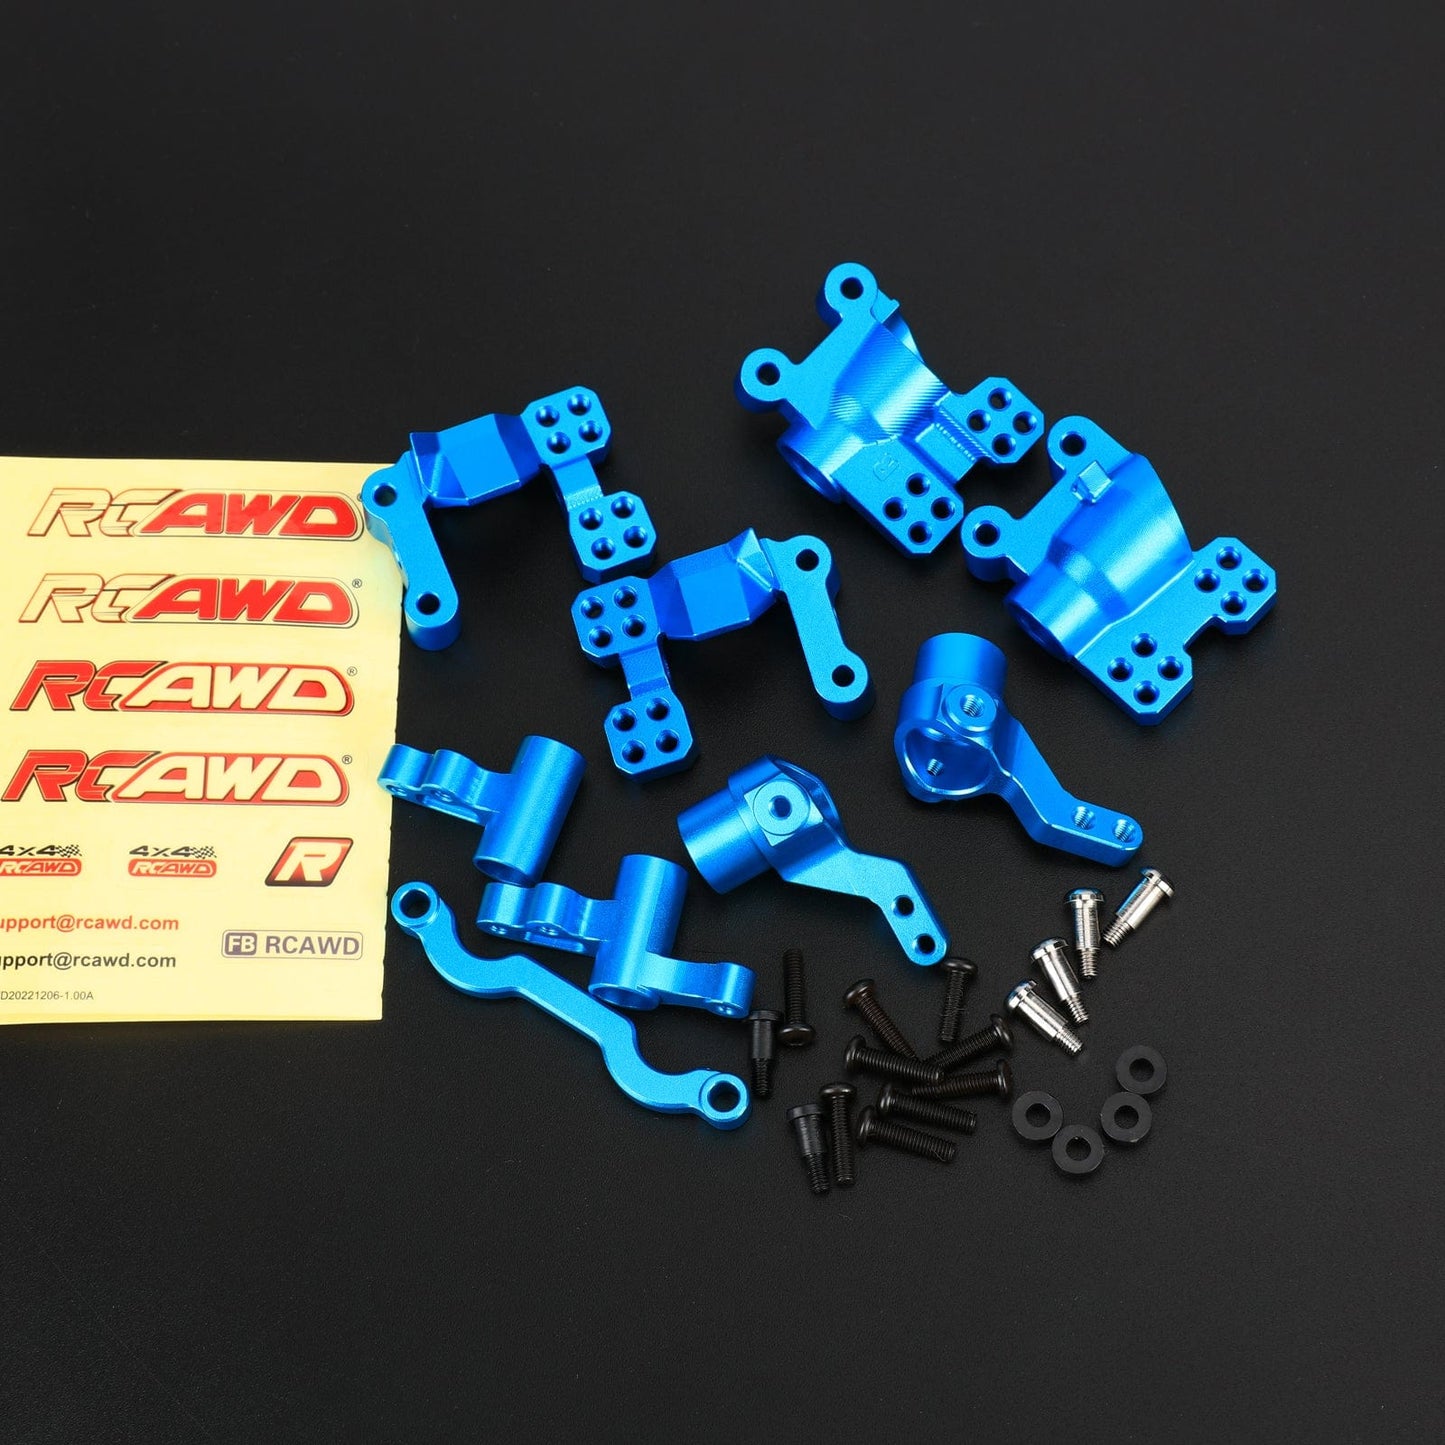 RCAWD RCAWD 1/8 CEN Upgrade Steering Bellcrank Knuckle CM02002